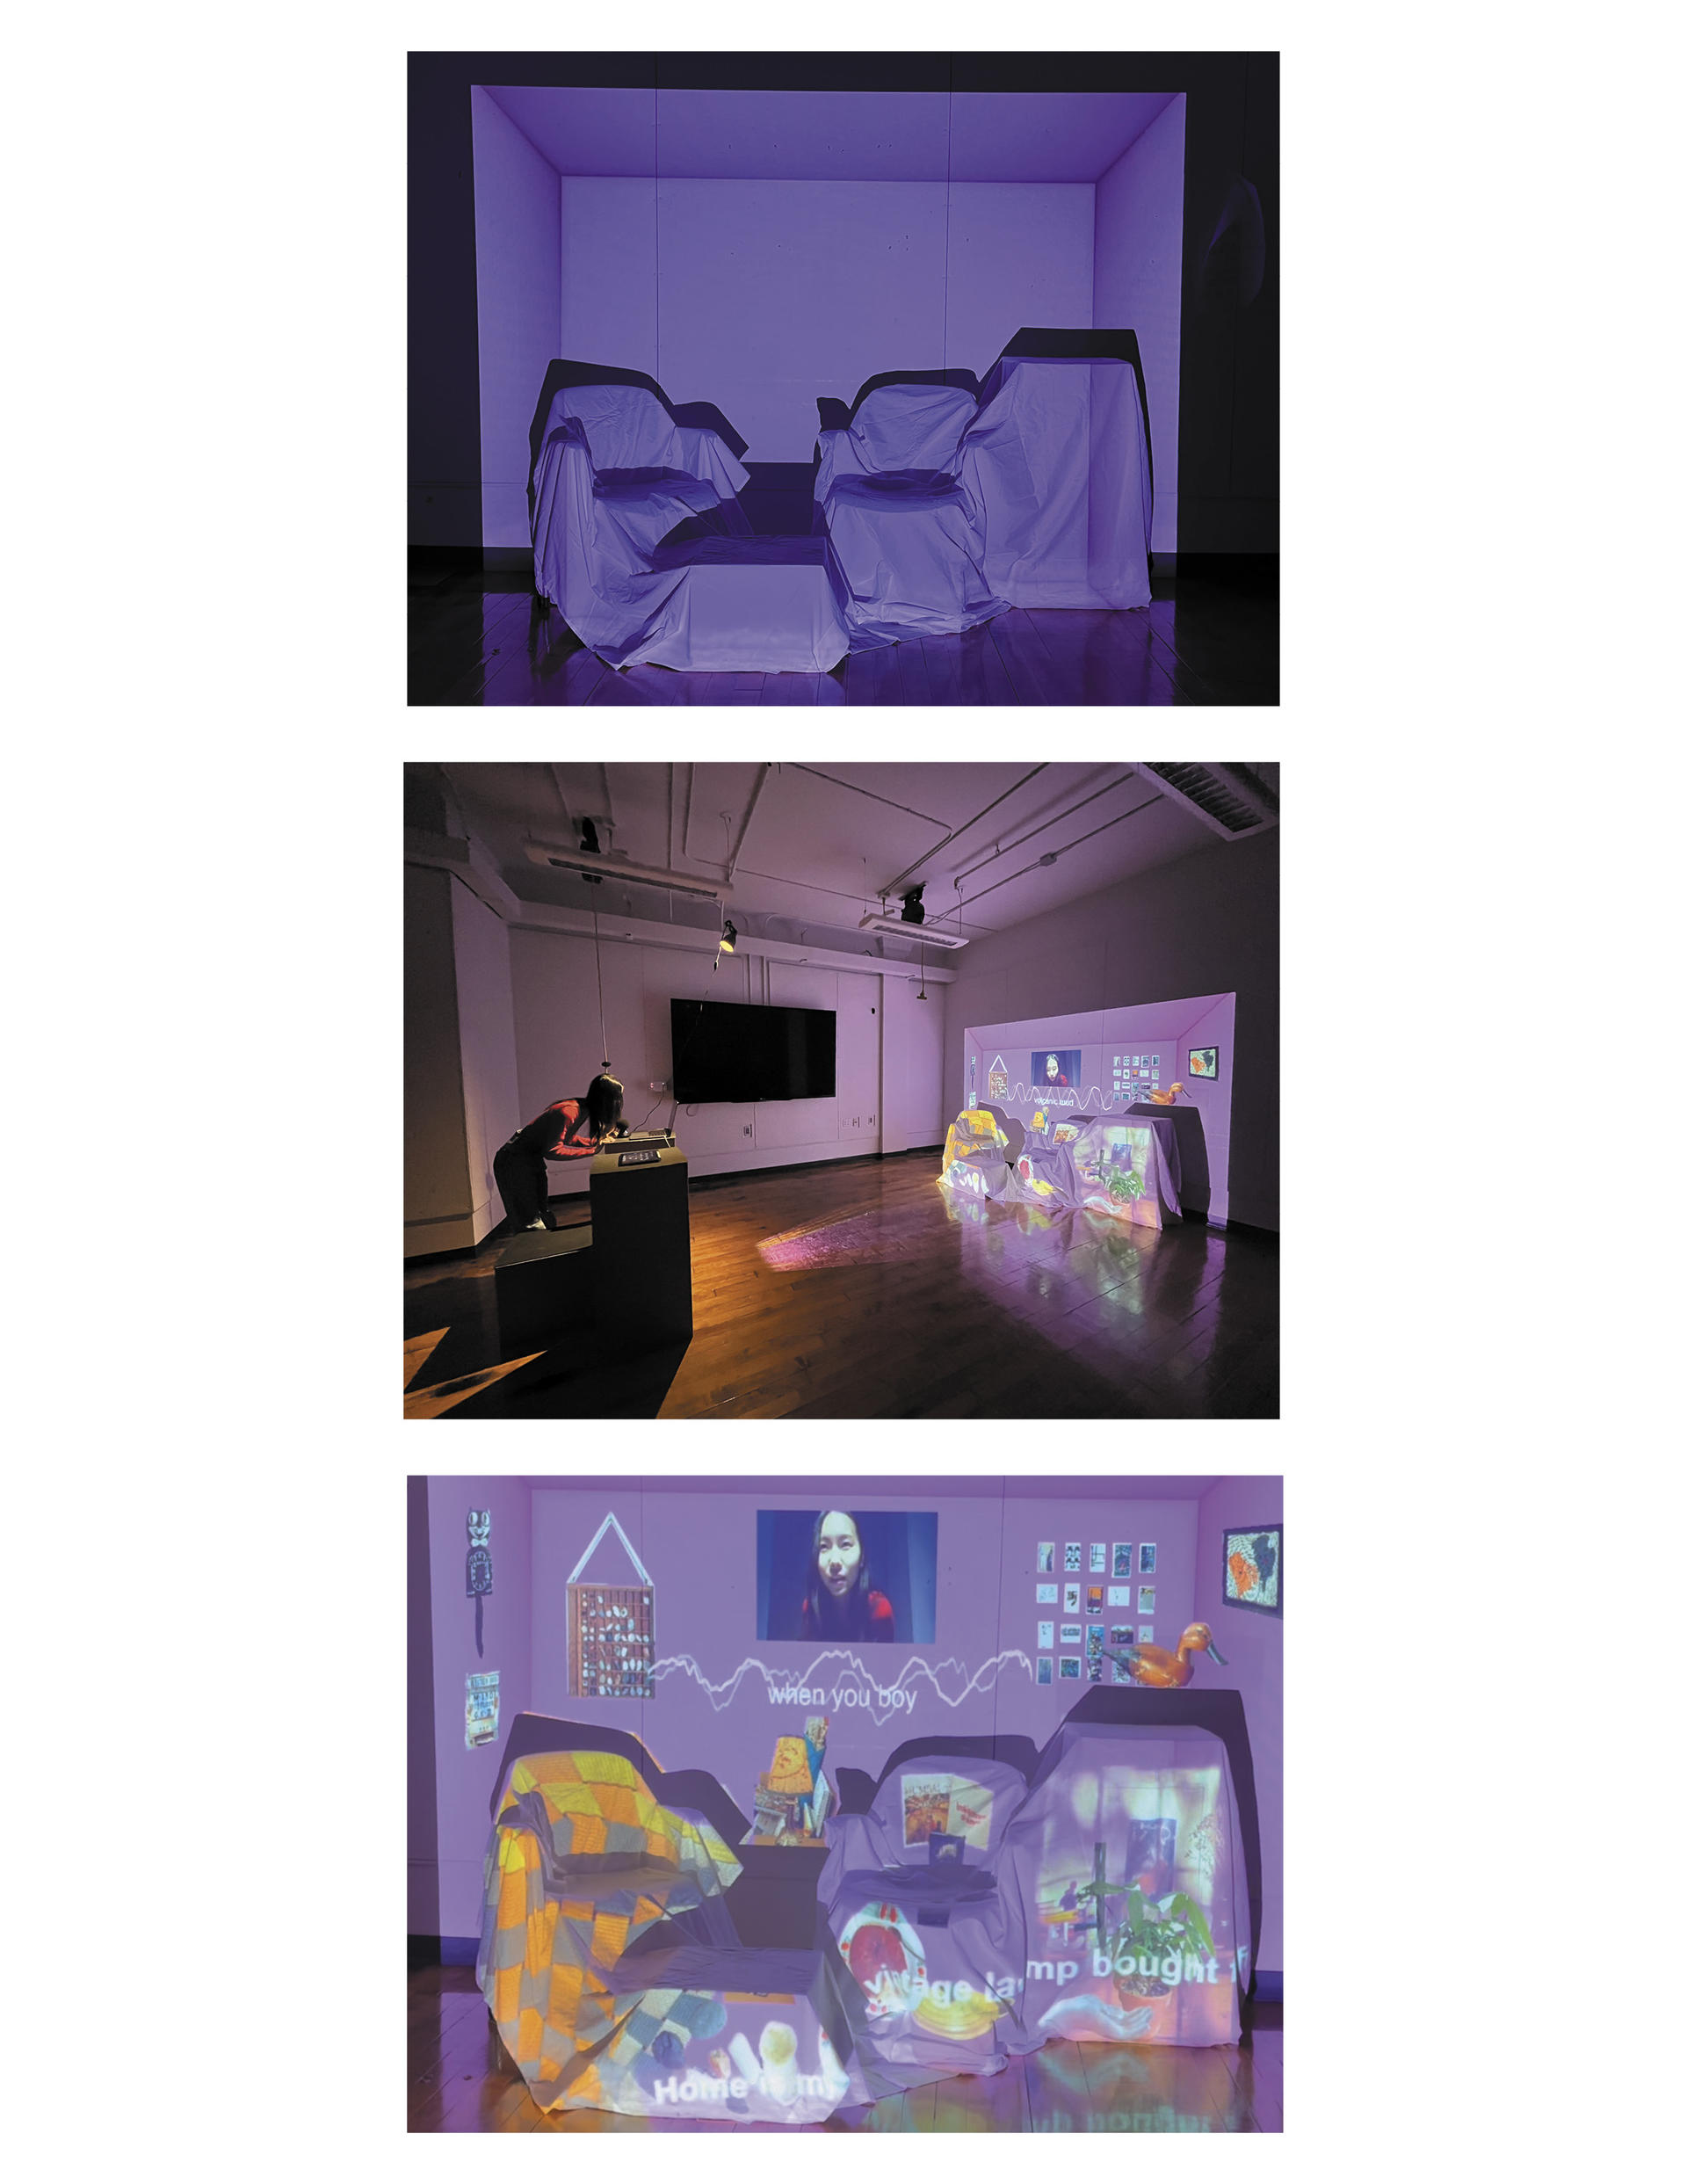 A woman interacting with installation by speaking into the microphone and objects being projected onto the domestic environment